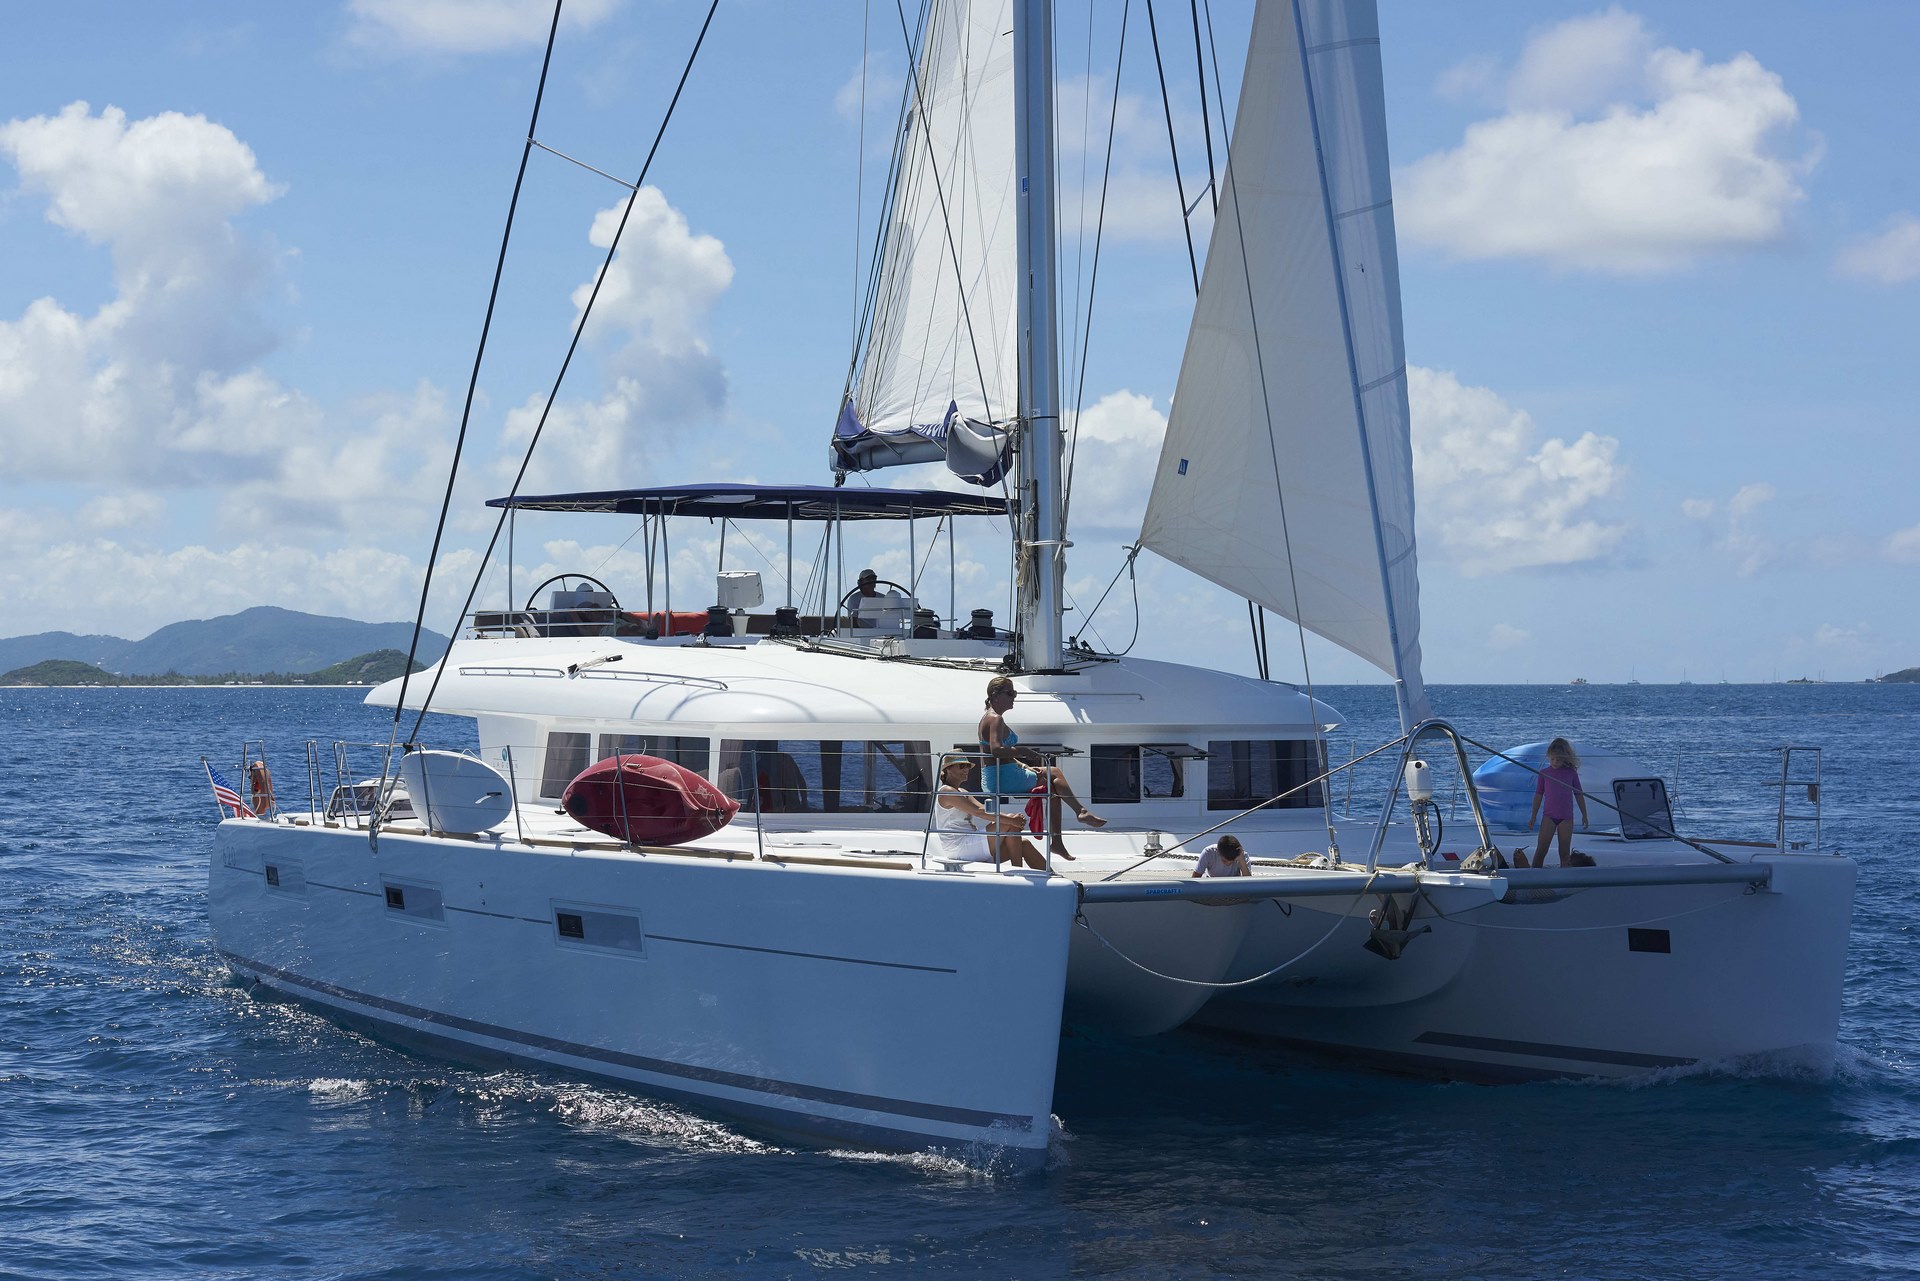 CROISIERE DREAM YACHT GUADELOUPE - 9J/7N